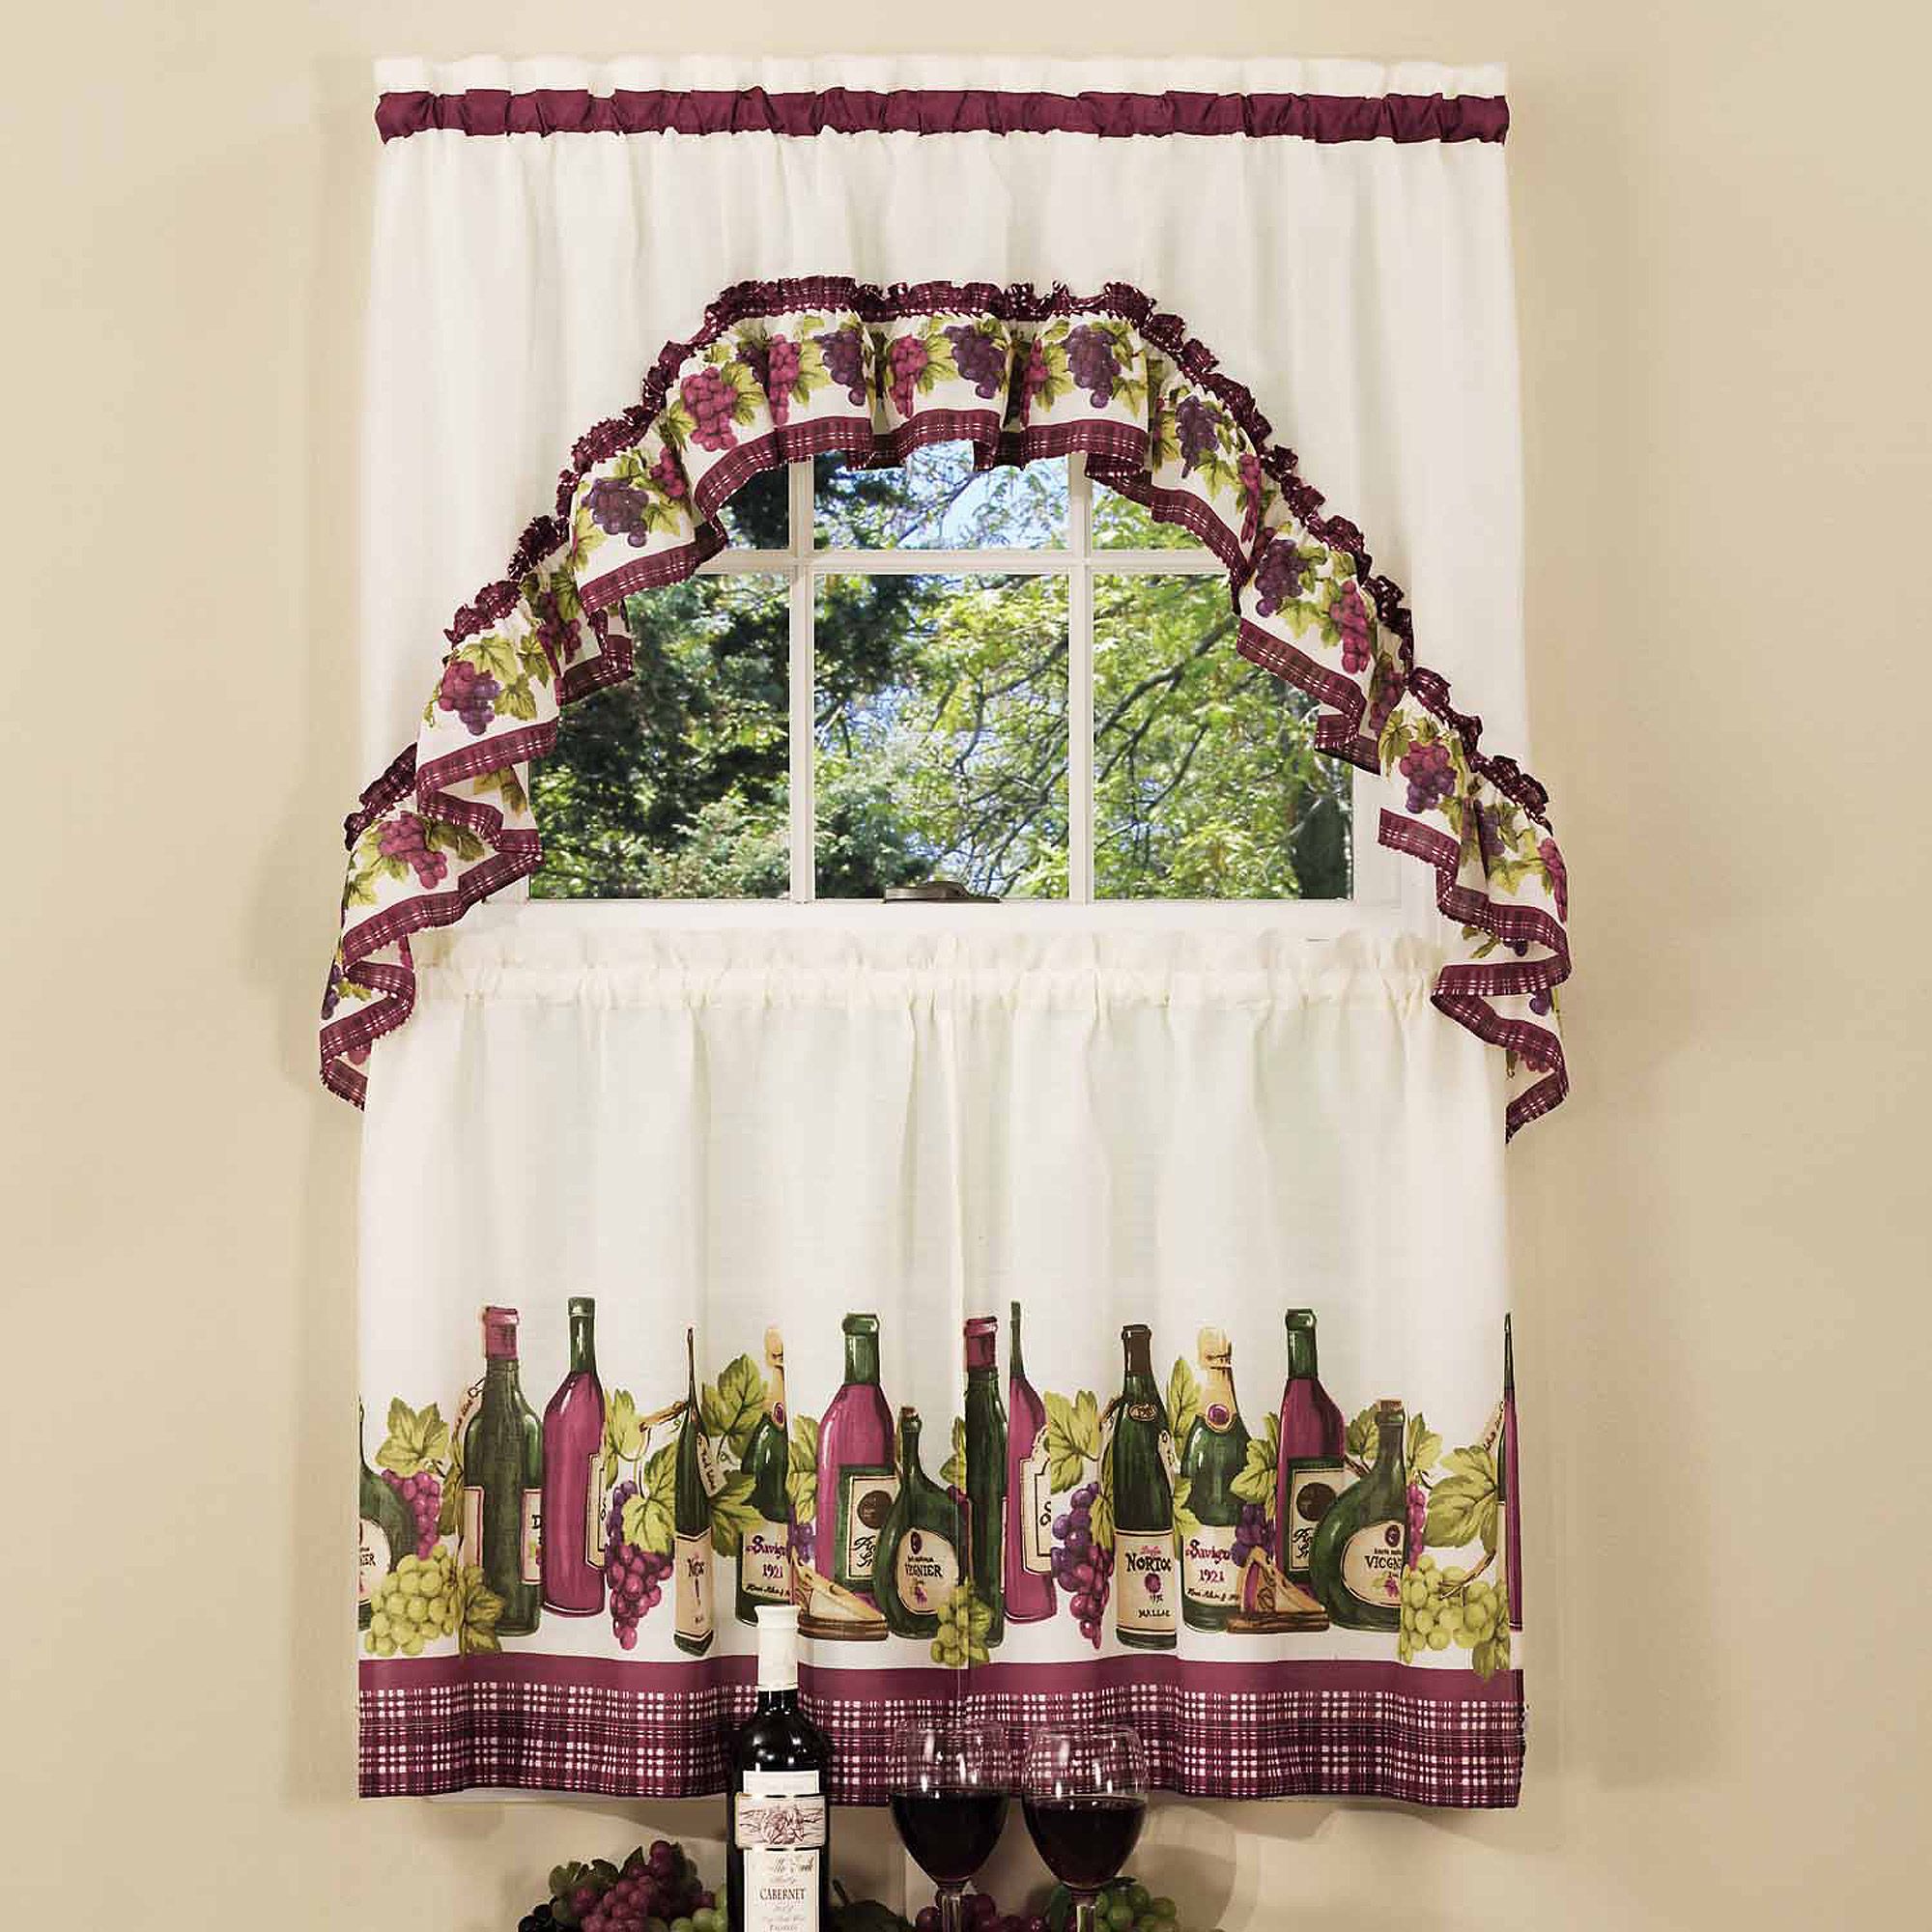 Chardonnay Kitchen Curtain & Swag Set, 1 Each In Multicolored Printed Curtain Tier And Swag Sets (View 19 of 20)